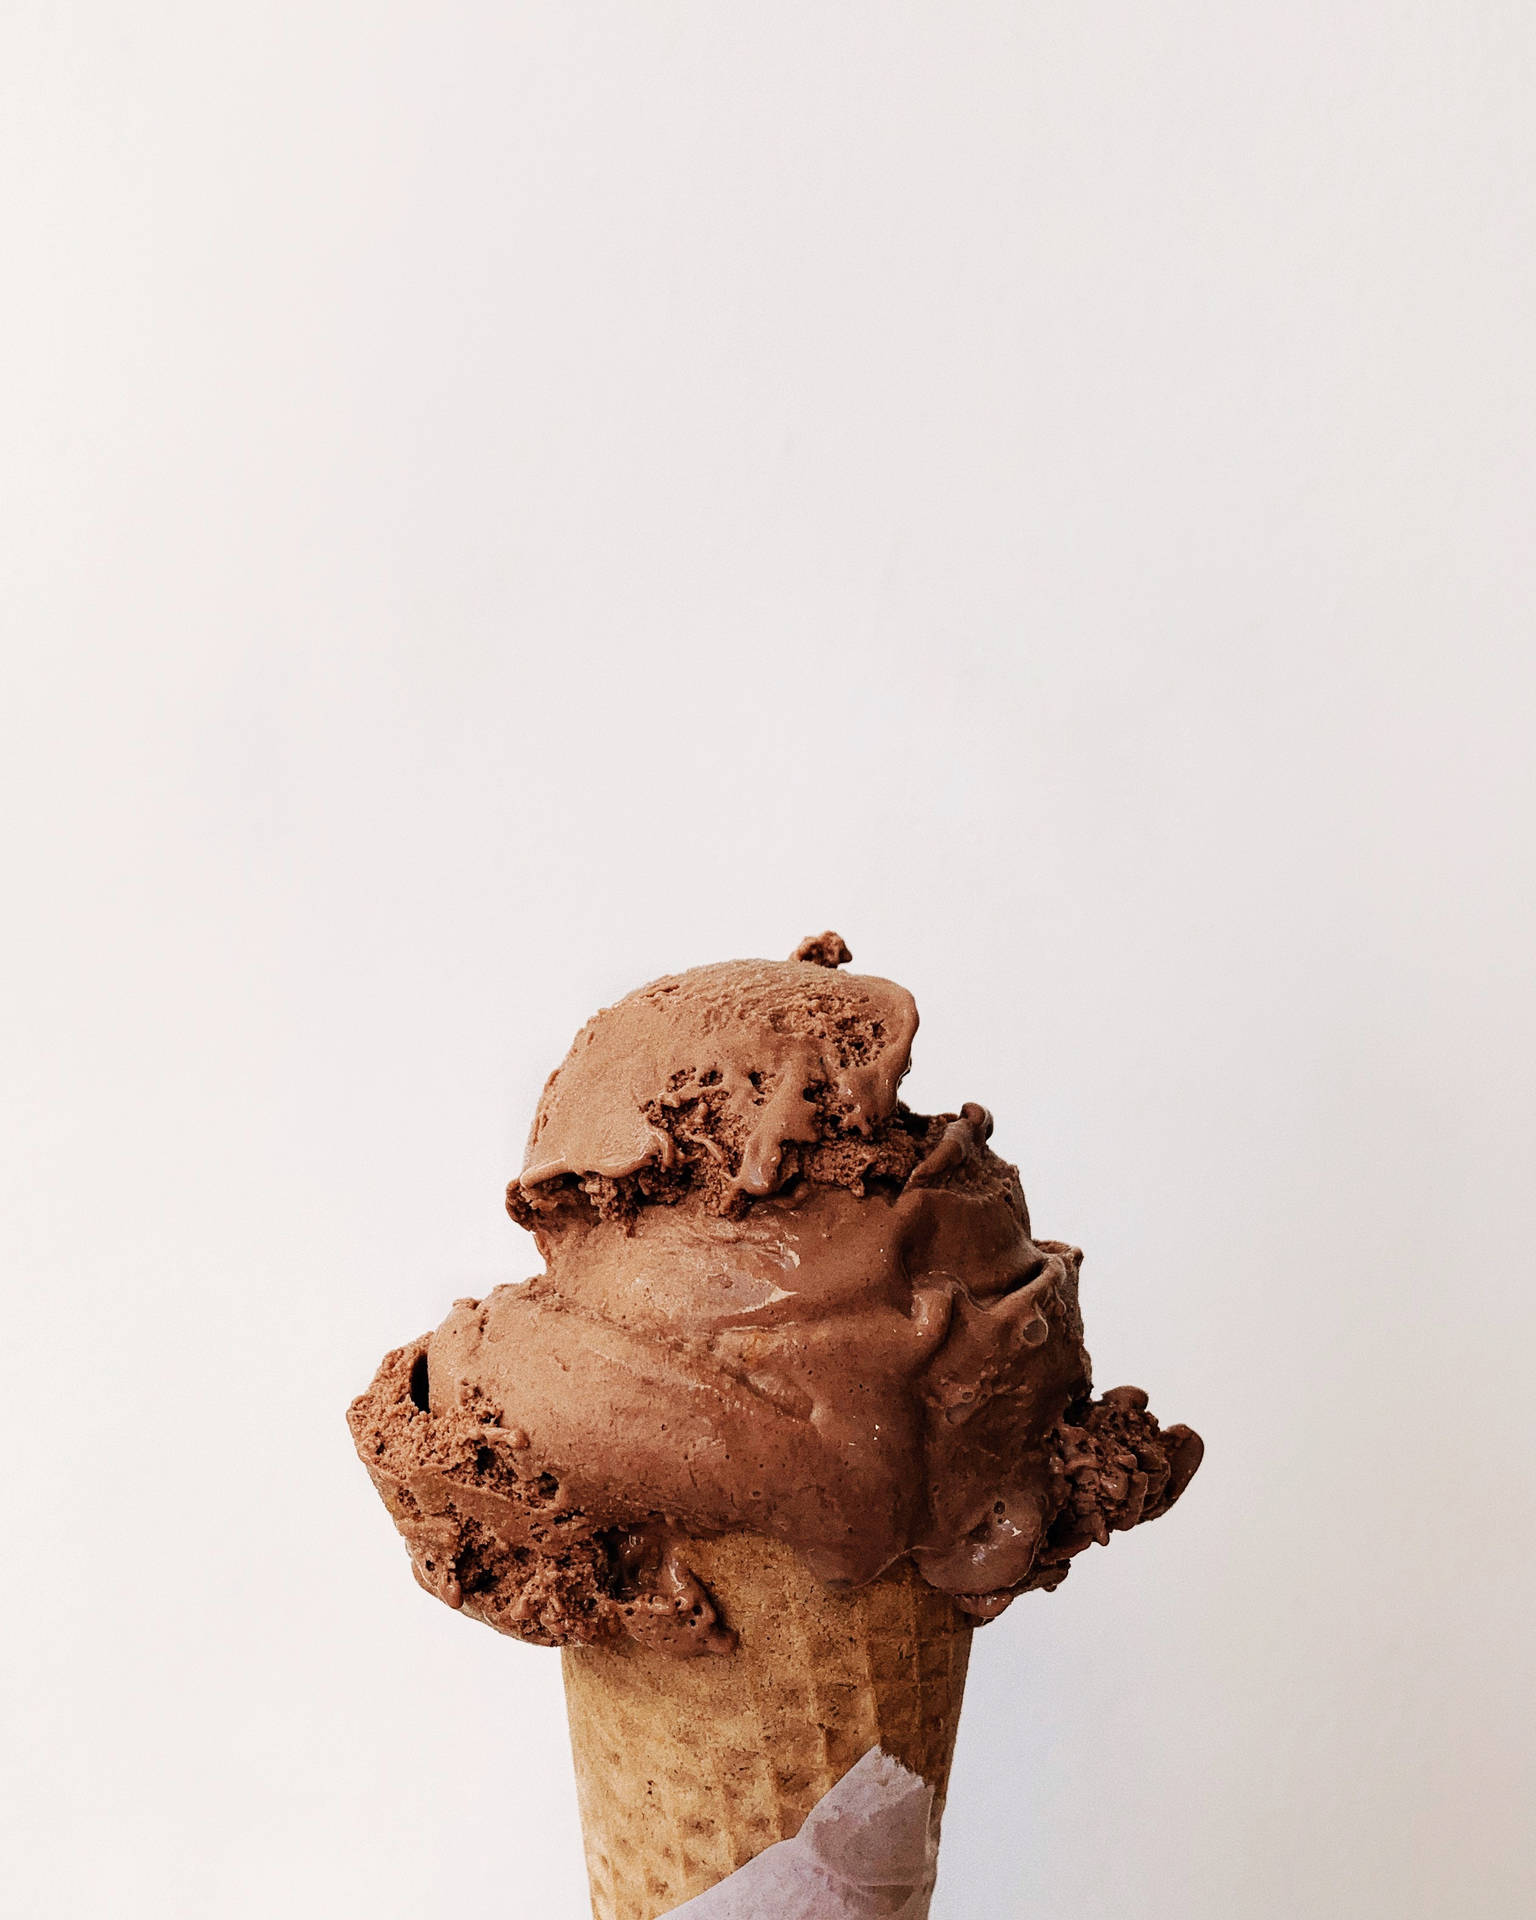 Mouthwatering Chocolate Ice Cream Background